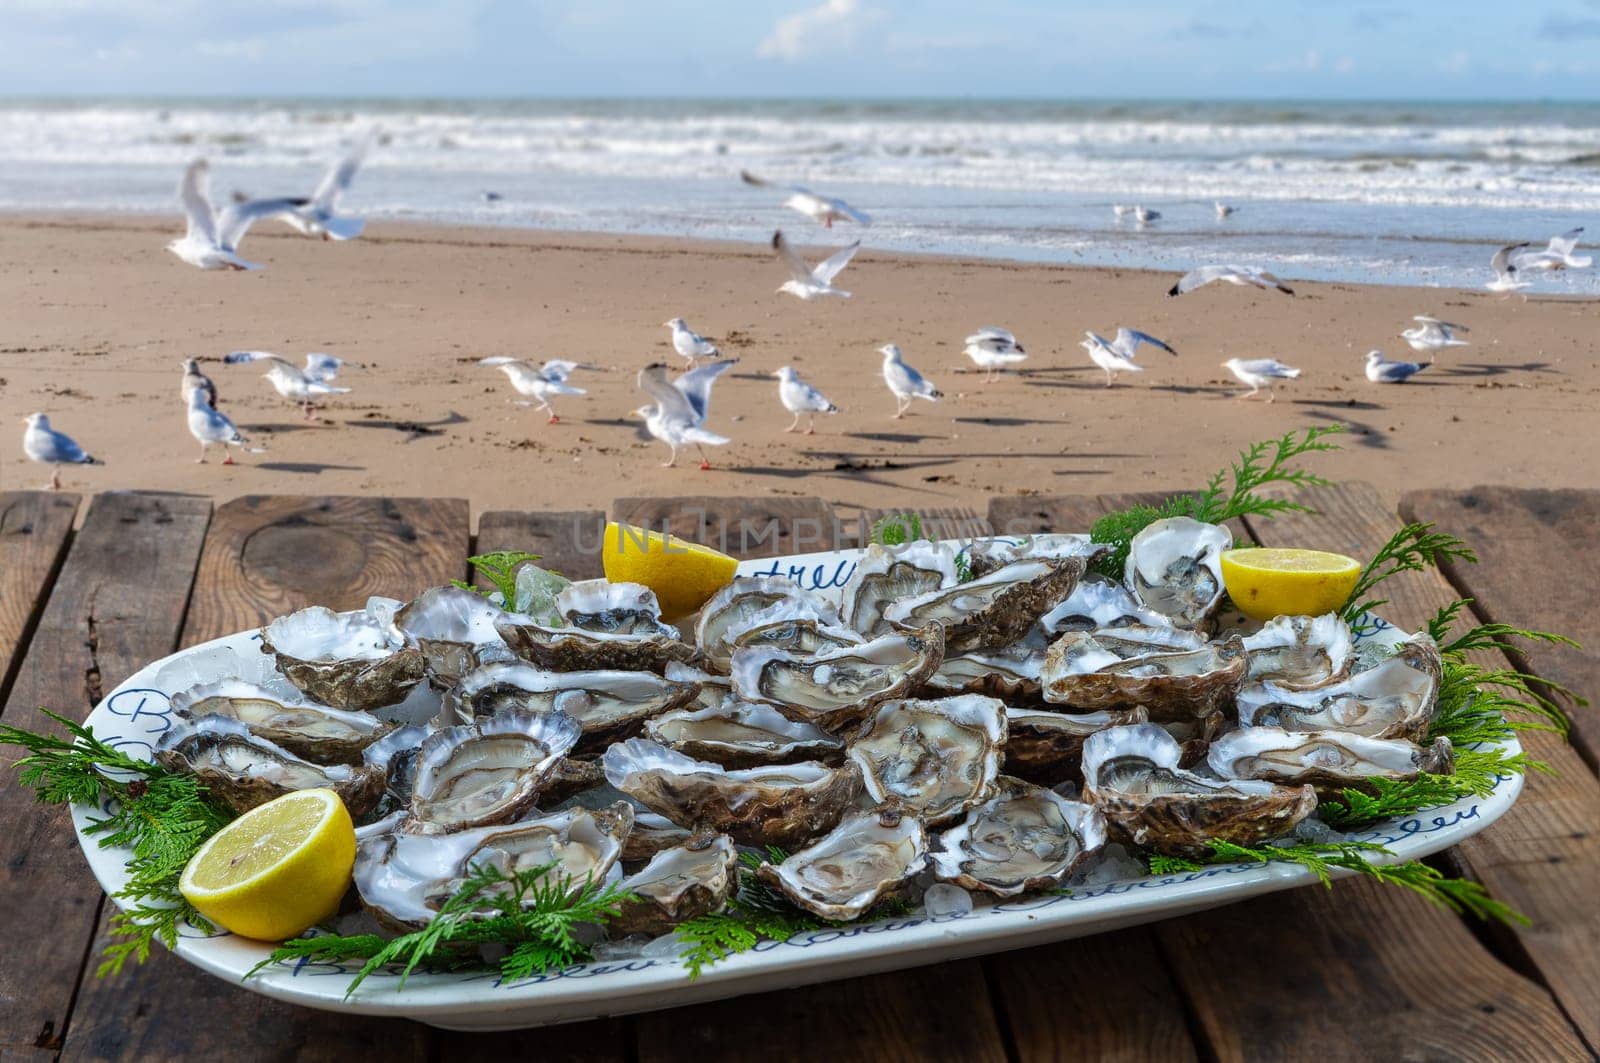 Oysters and white wine in a restaurant with a sea view